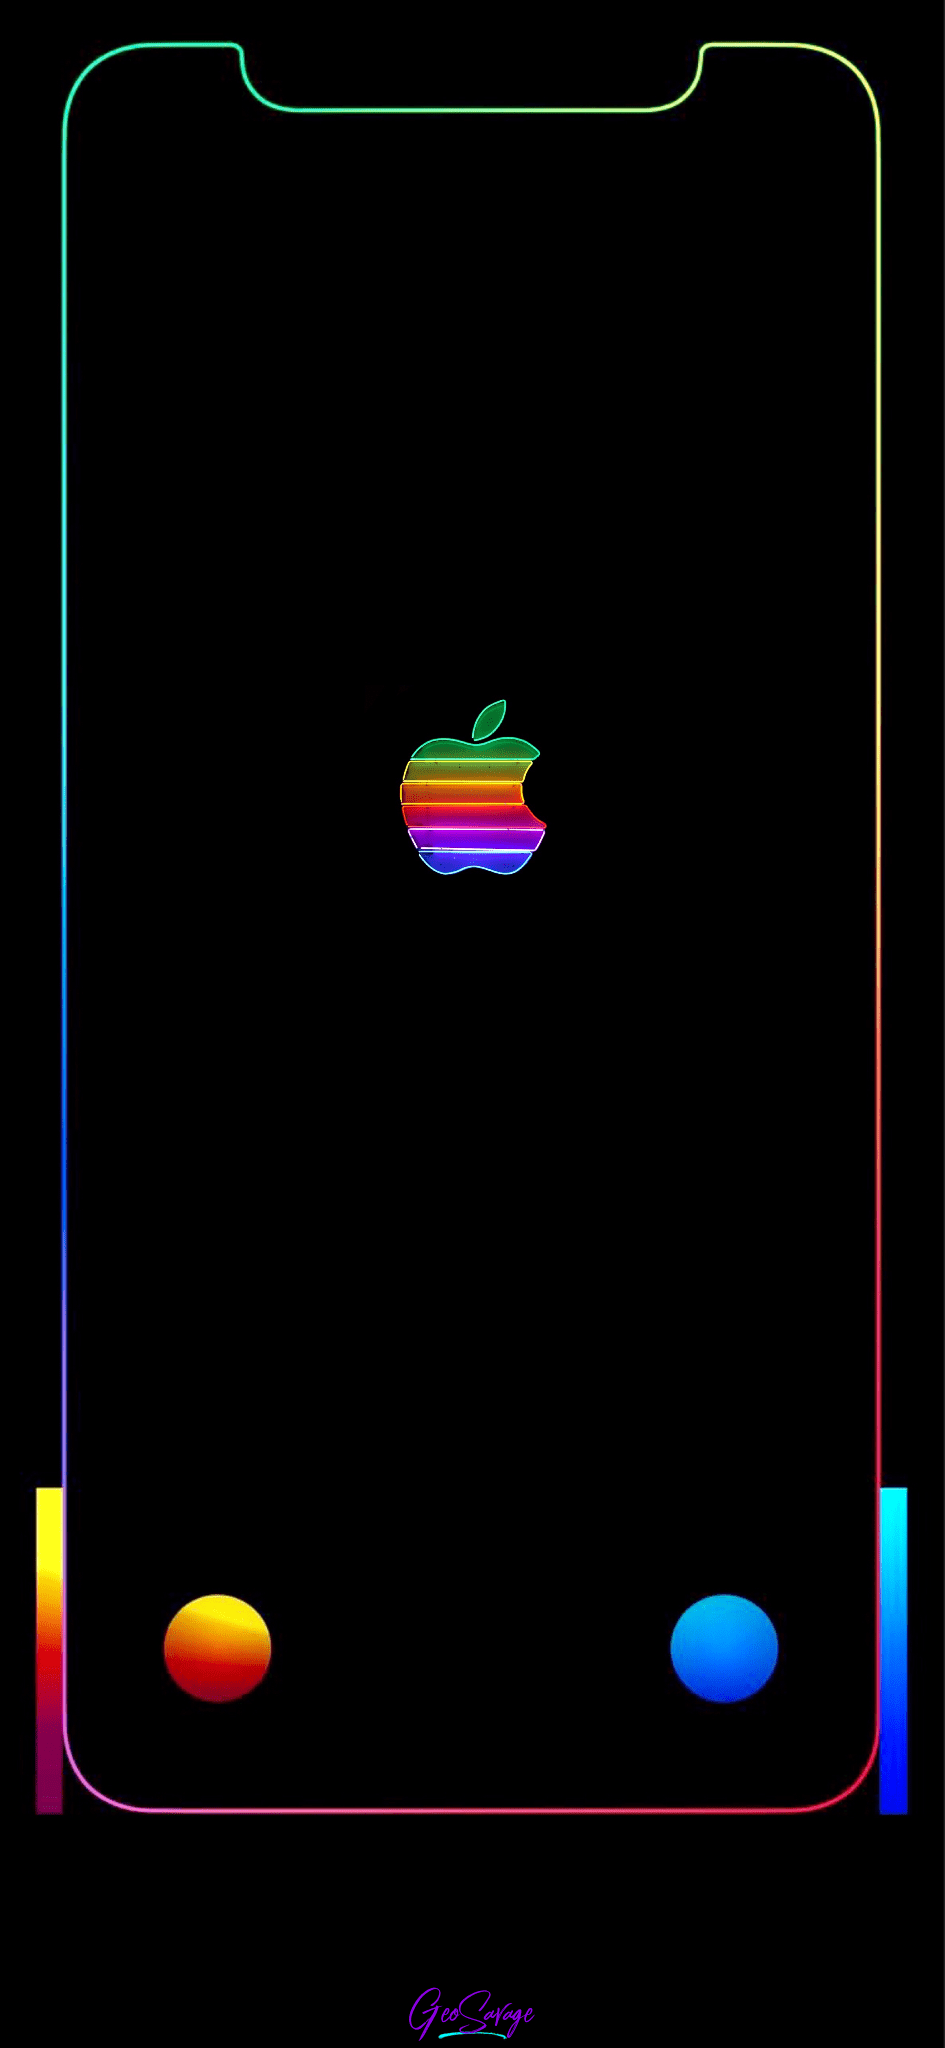 Apple Think Different Poster. Retro Apple Logo Poster. Apple - Etsy Norway